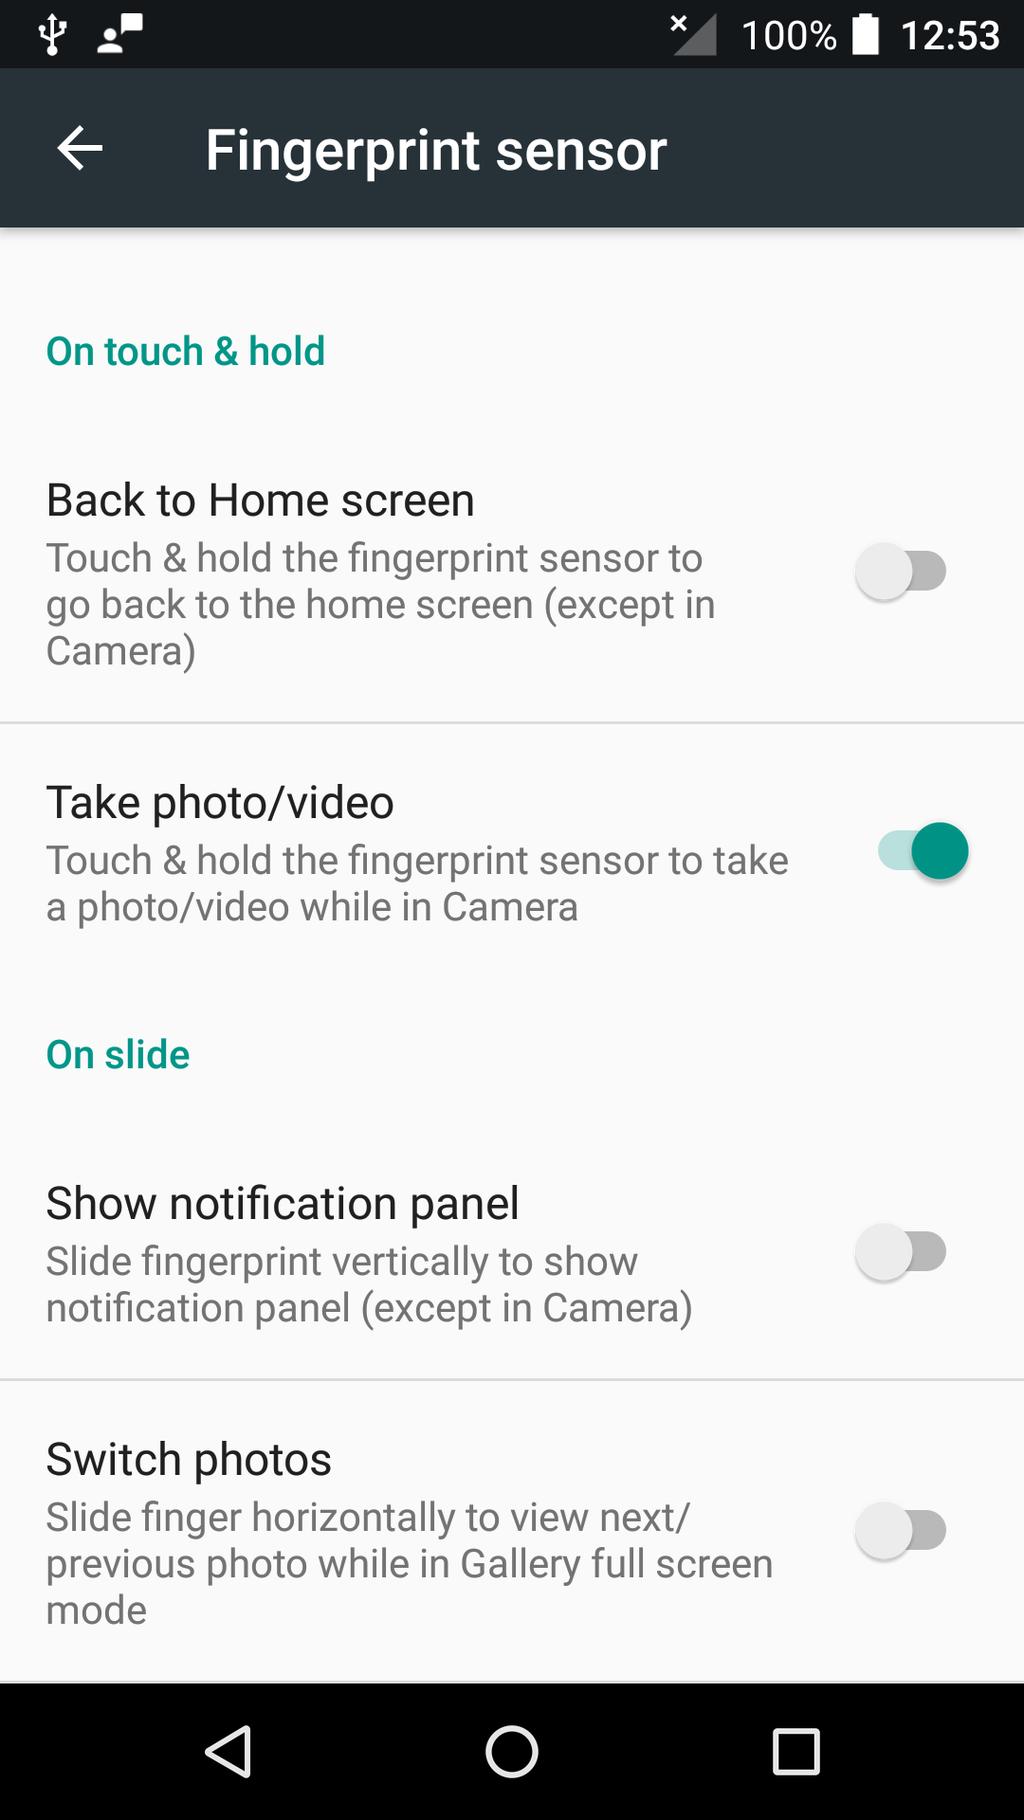 screen/camera/notification/photos function. Take Take photo/video option for example.